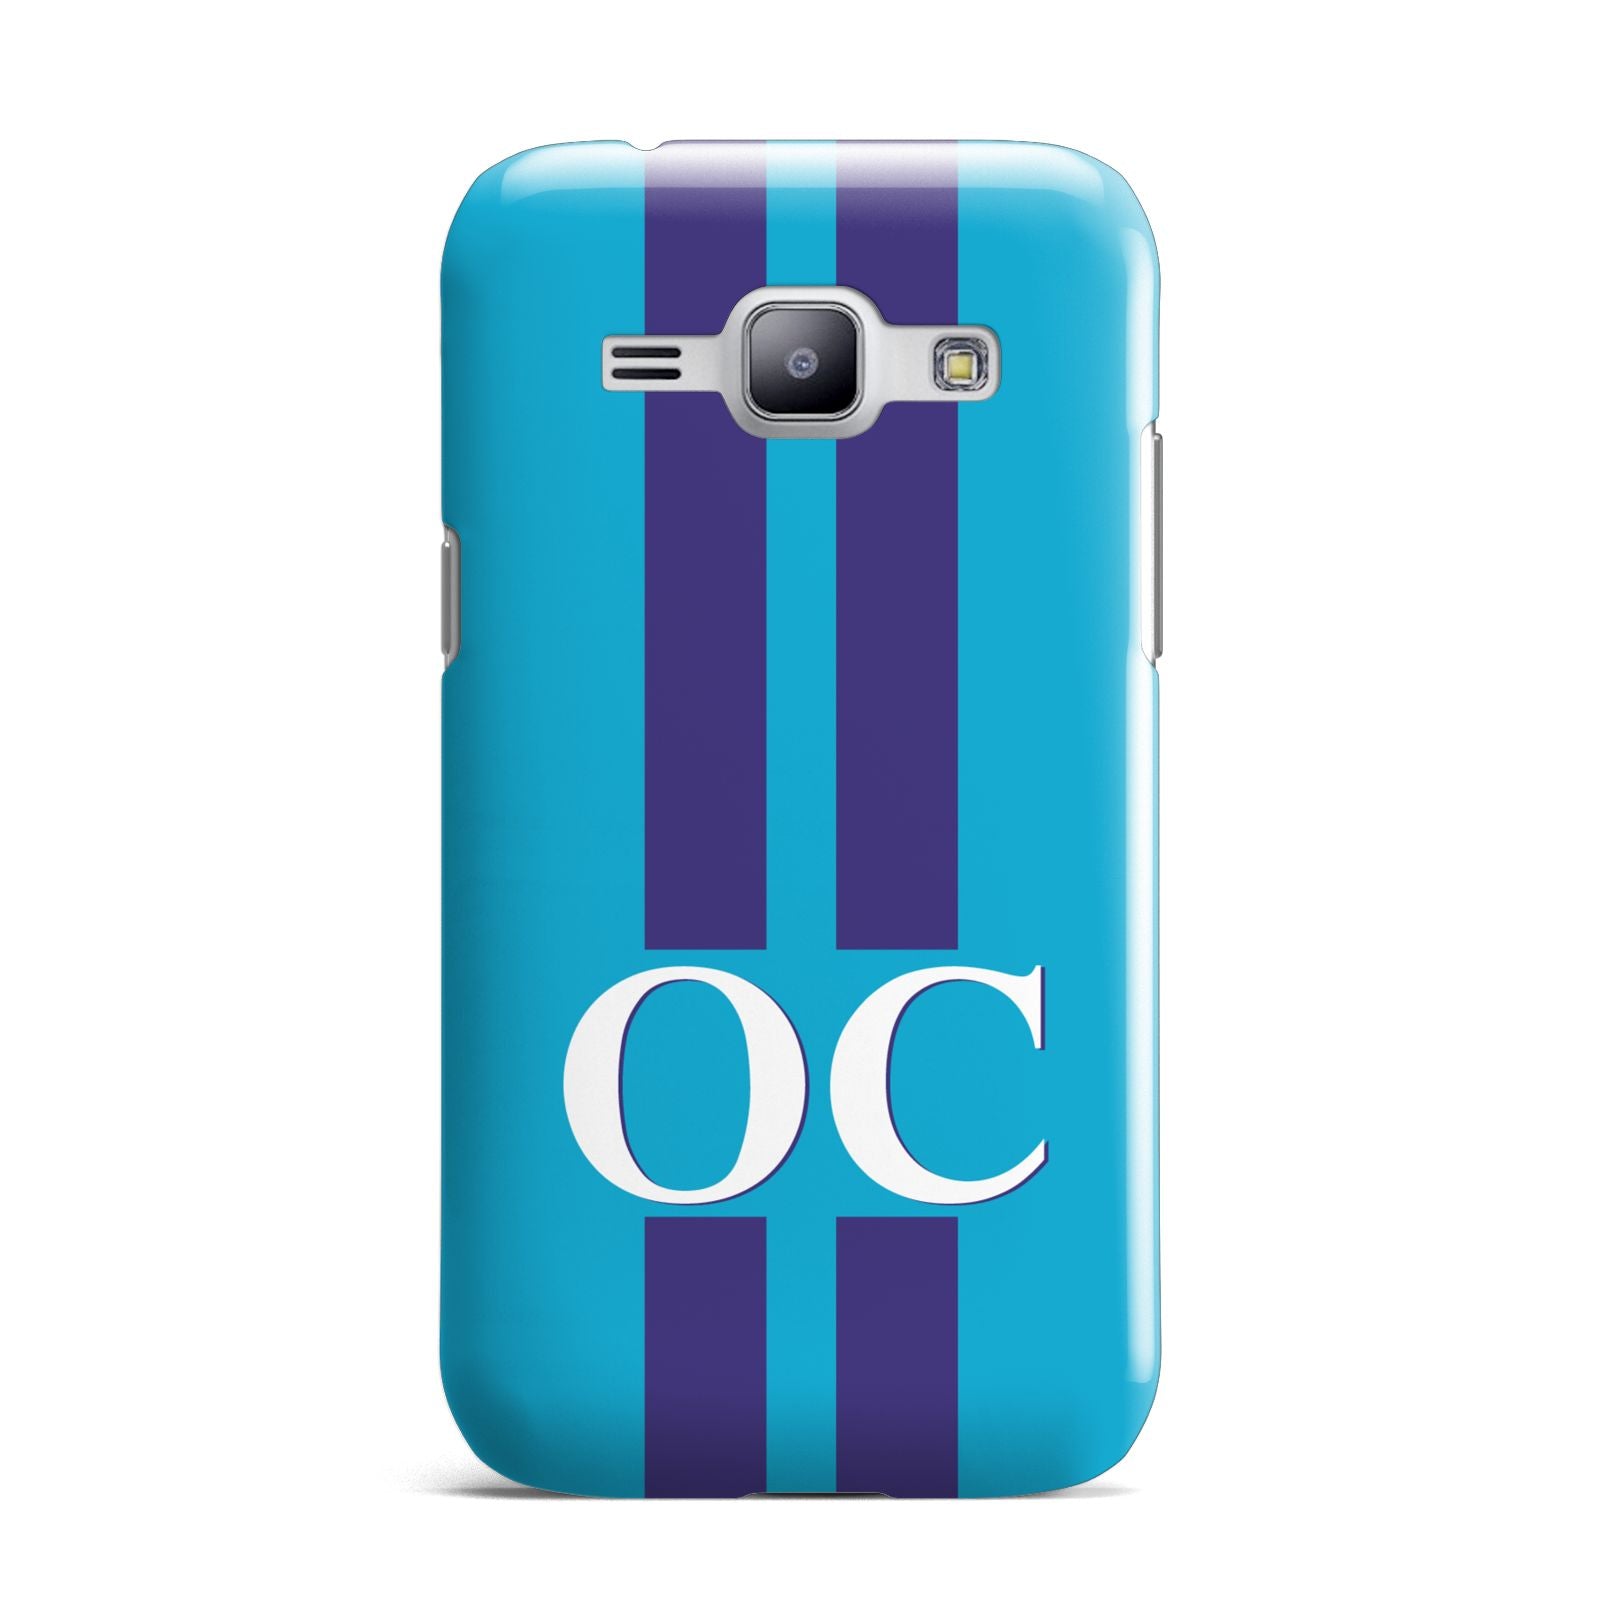 Turquoise Personalised Samsung Galaxy J1 2015 Case